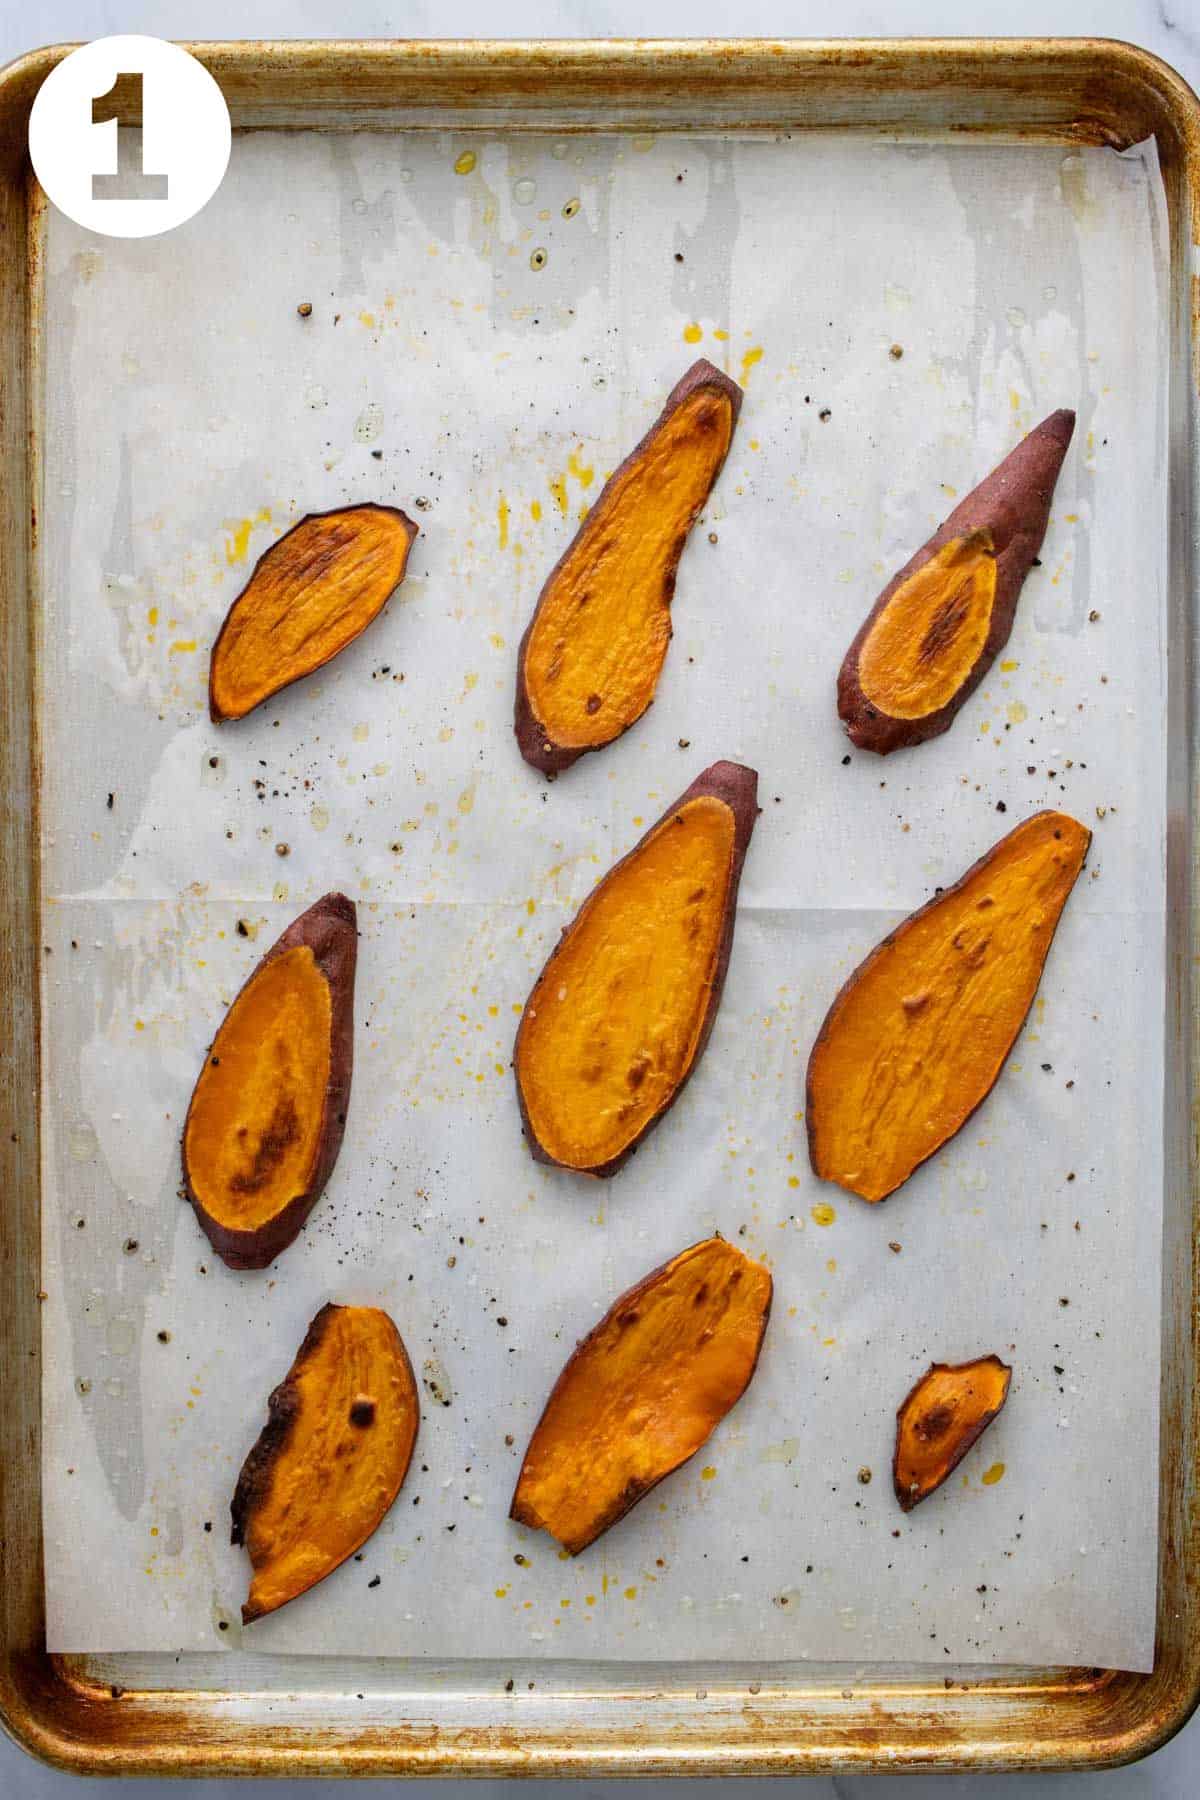 Thinly sliced roasted sweet potato on a baking sheet lined with parchment paper. Labeled "1."